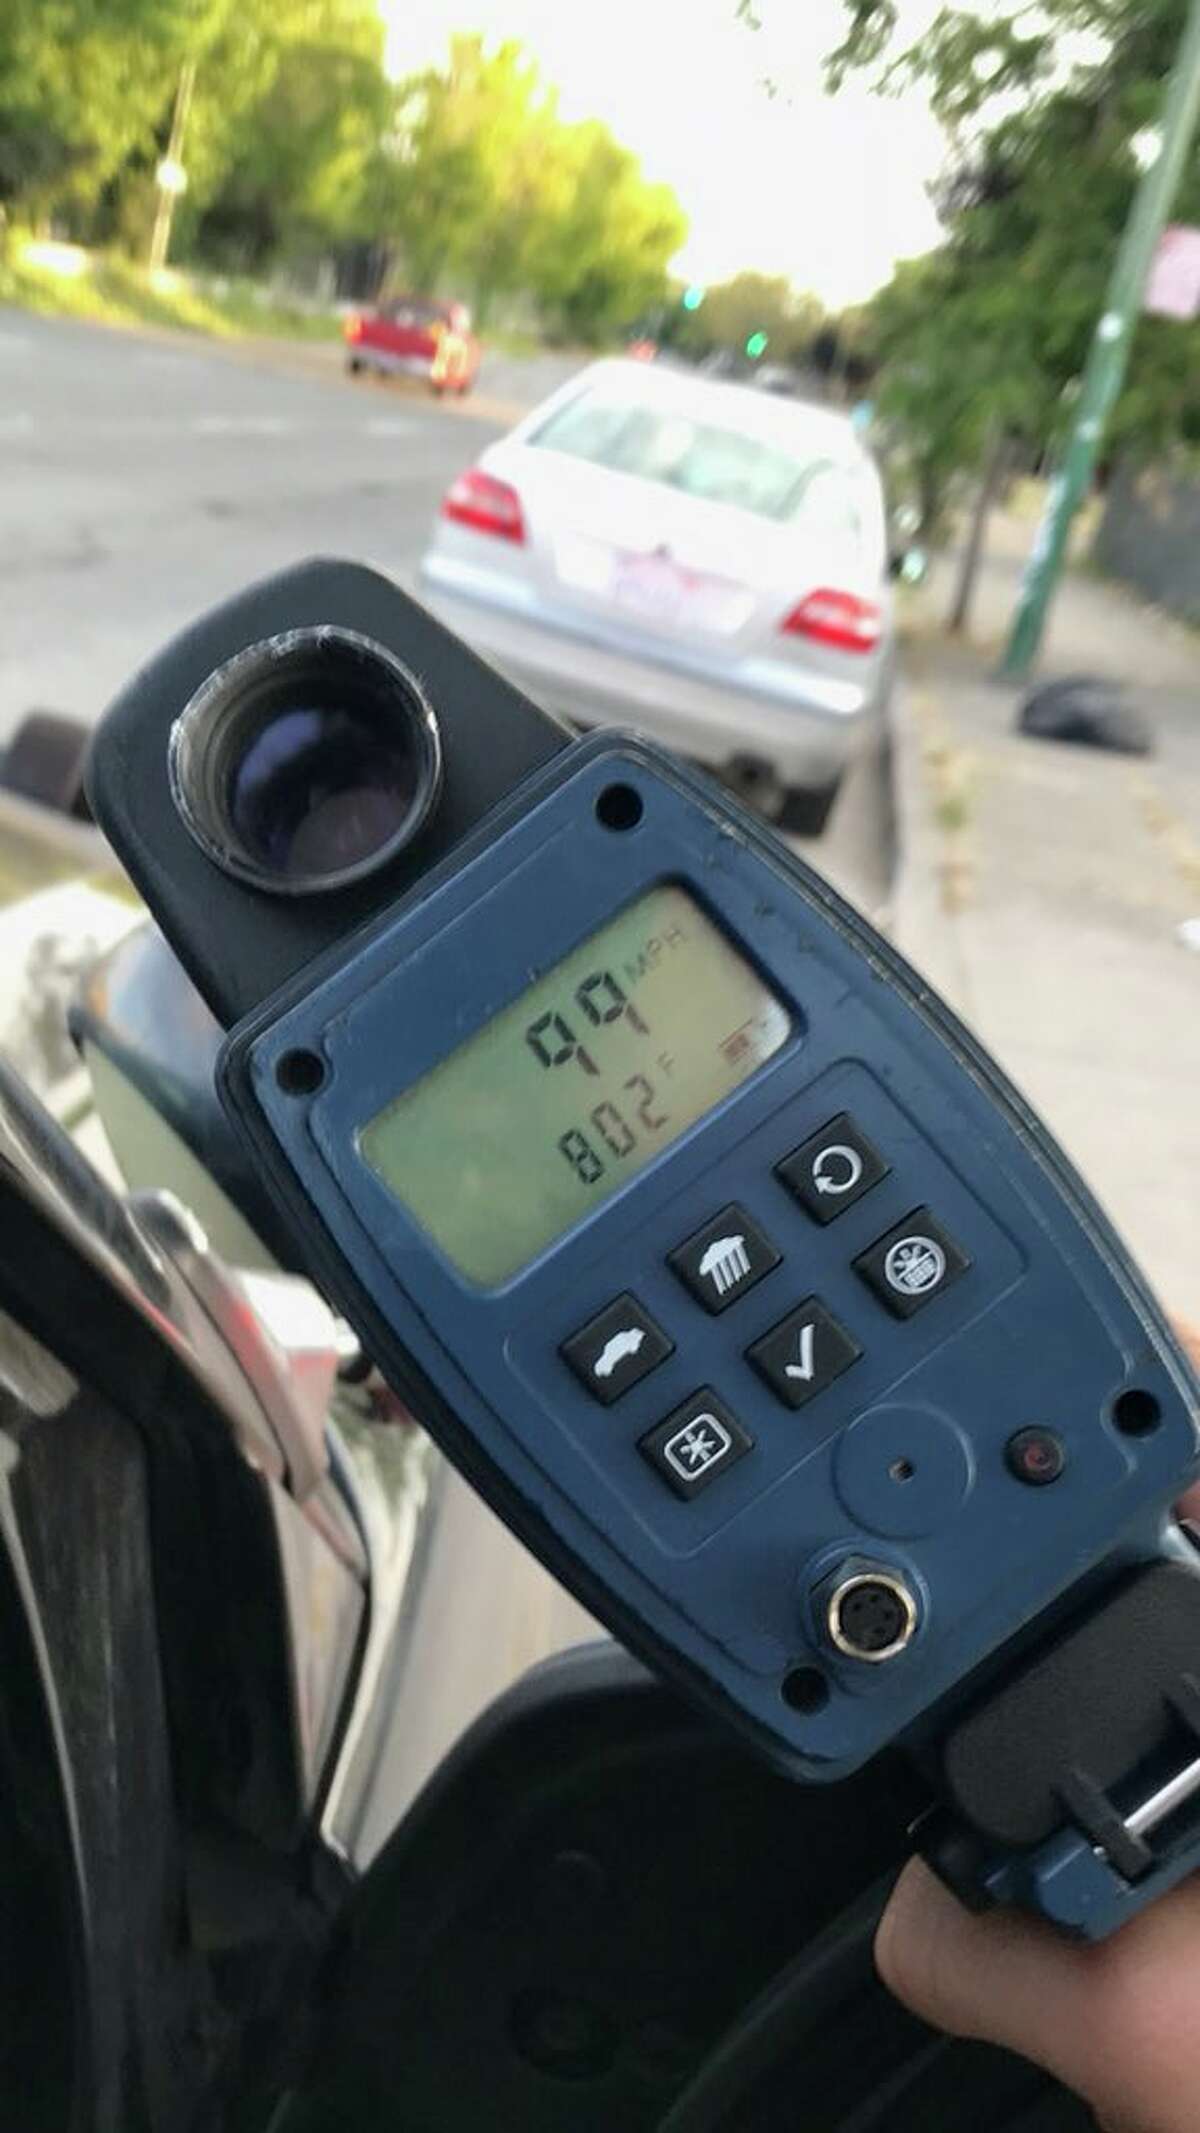 A man caught speeding tried to convince a Highway Patrol officer the speedometer reading was actually measuring the temperature, according to the California Highway Patrol. Click through the gallery for a roundup of reader-reported speedtraps in the Bay Area.